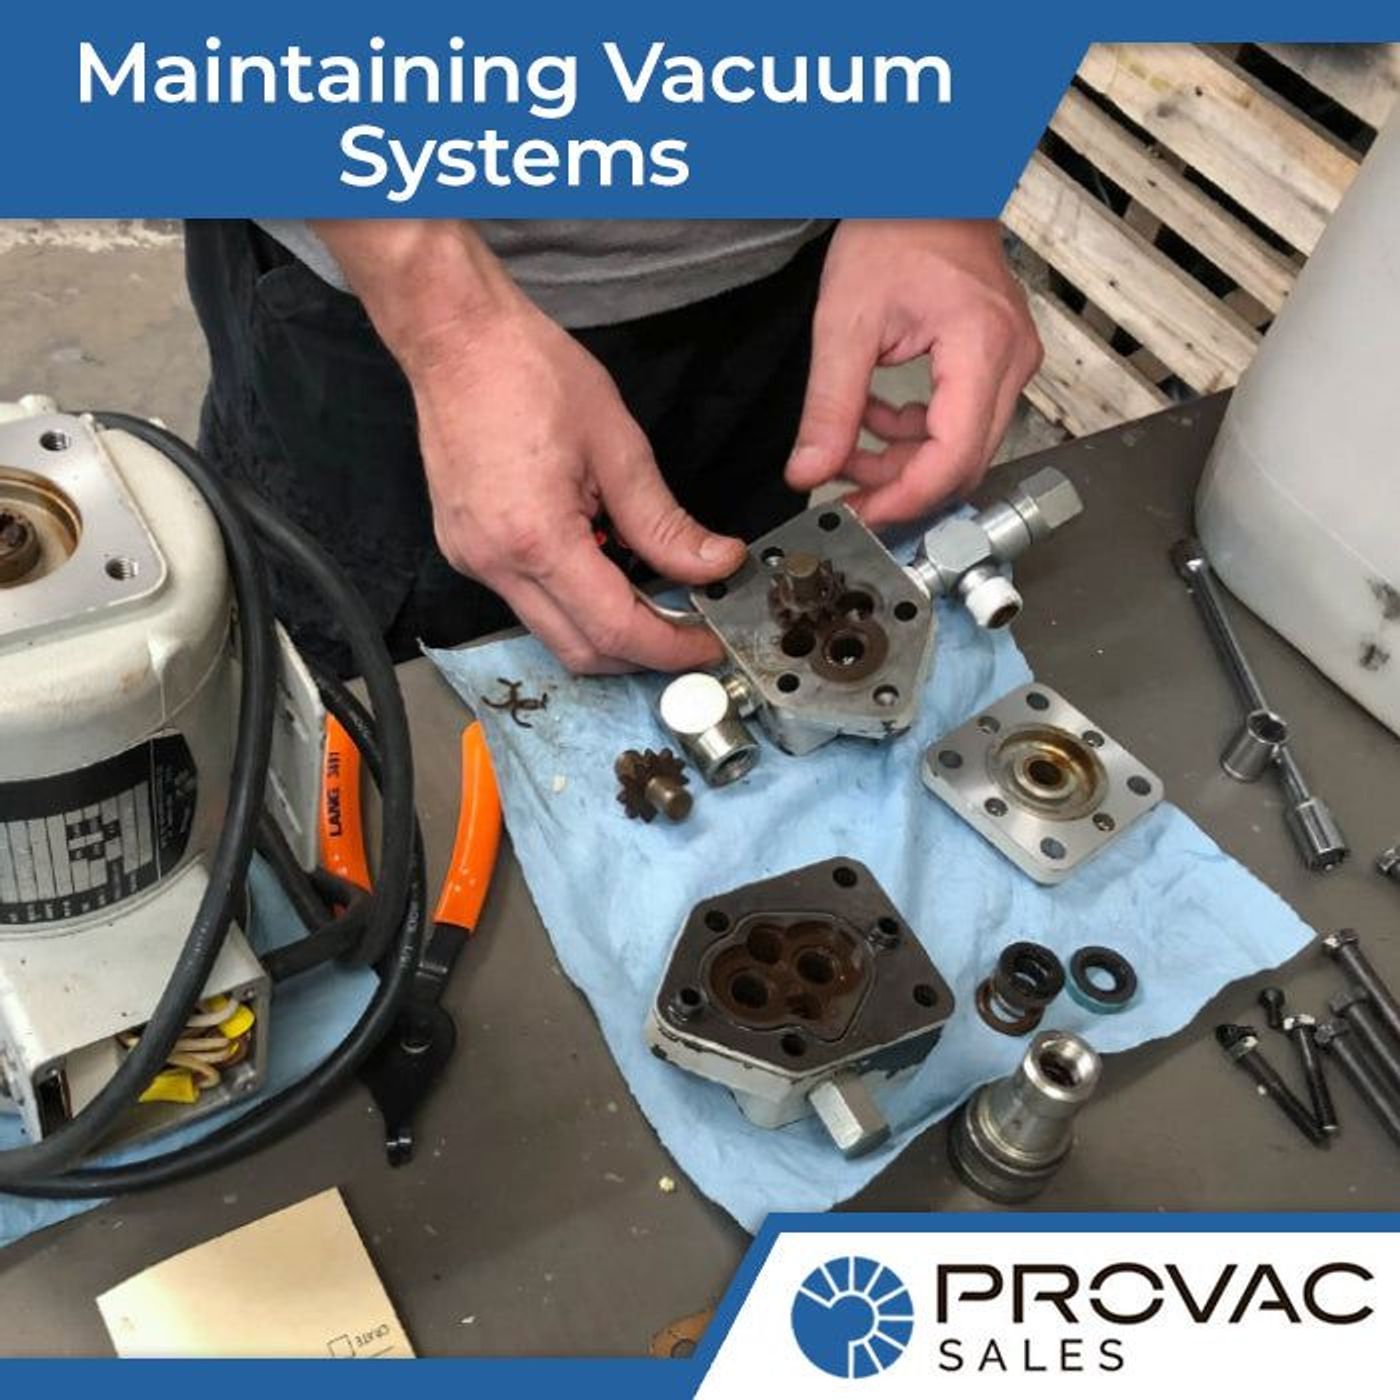 Maintaining Vacuum Systems - What You Need To Know